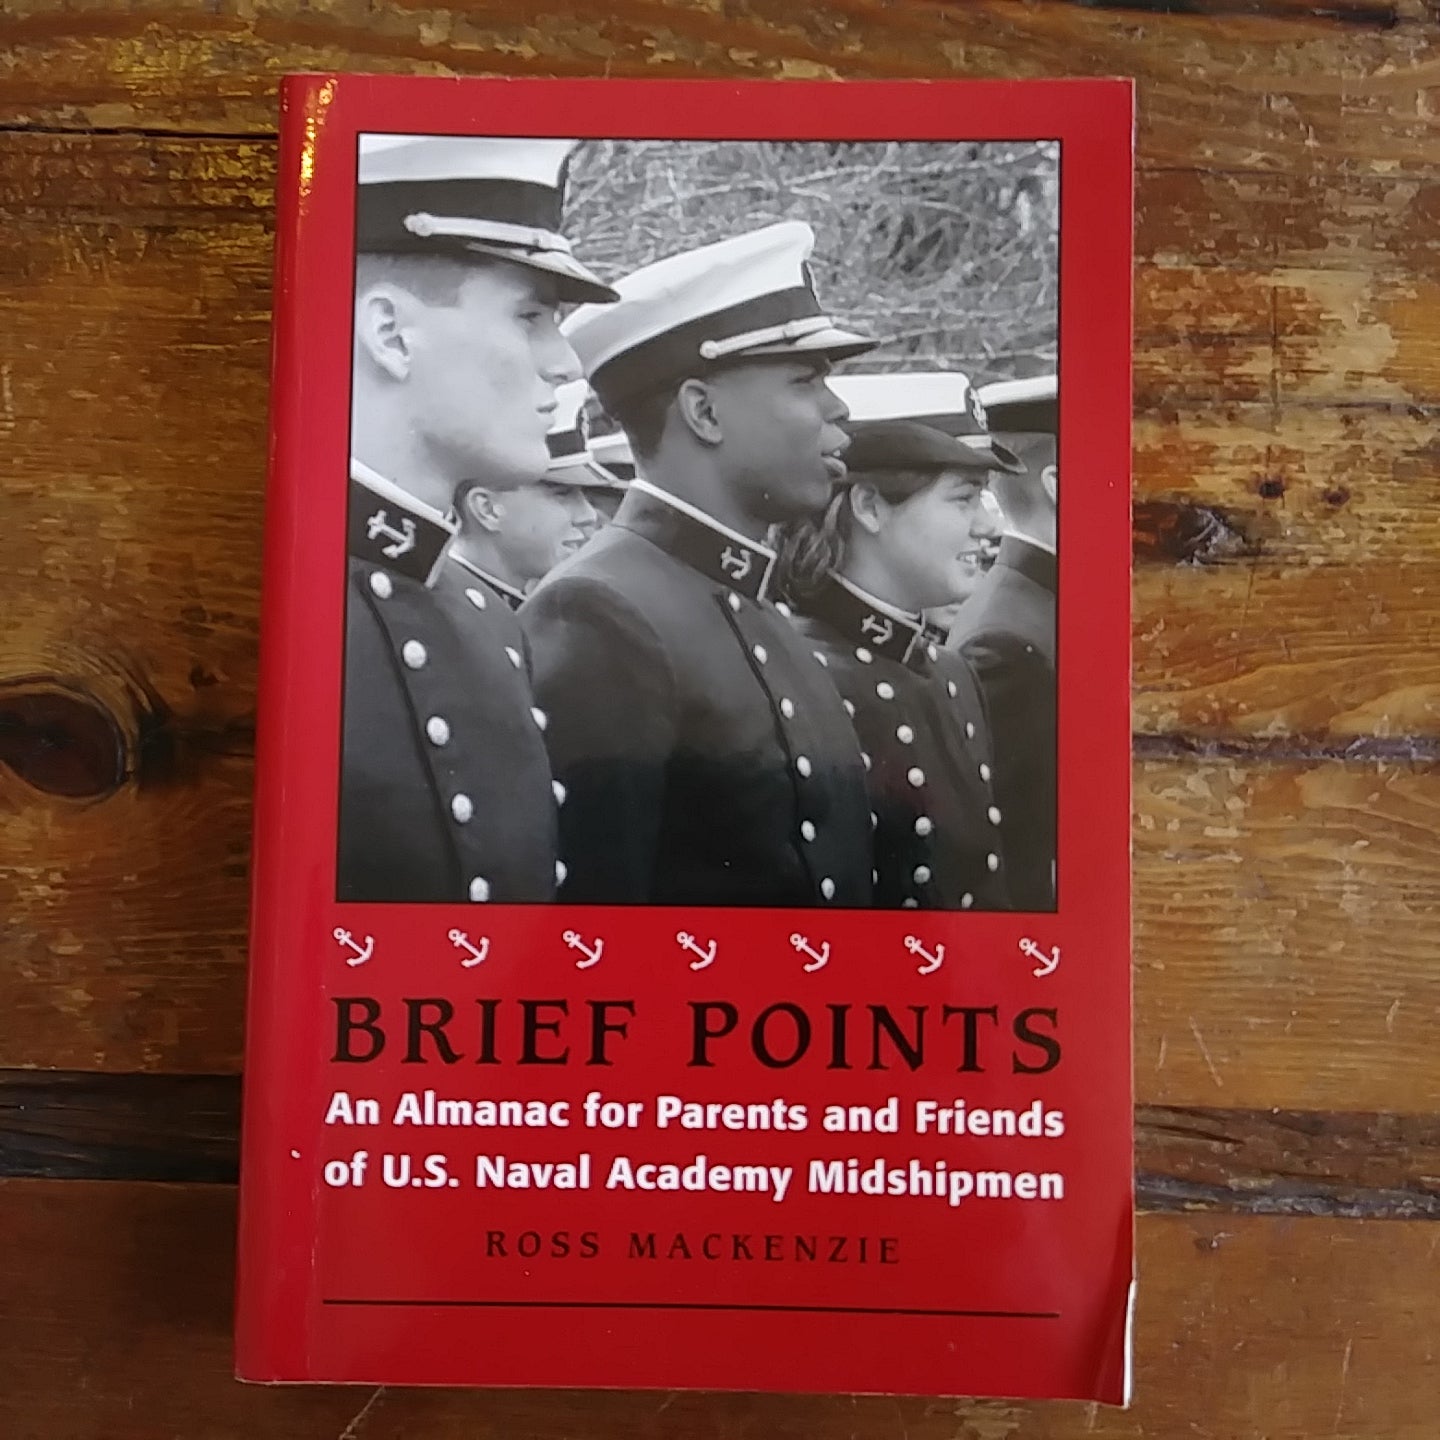 Book, "Brief Points - An Almanac for Parents and Friends of U.S. Naval Academy Midshipmen"